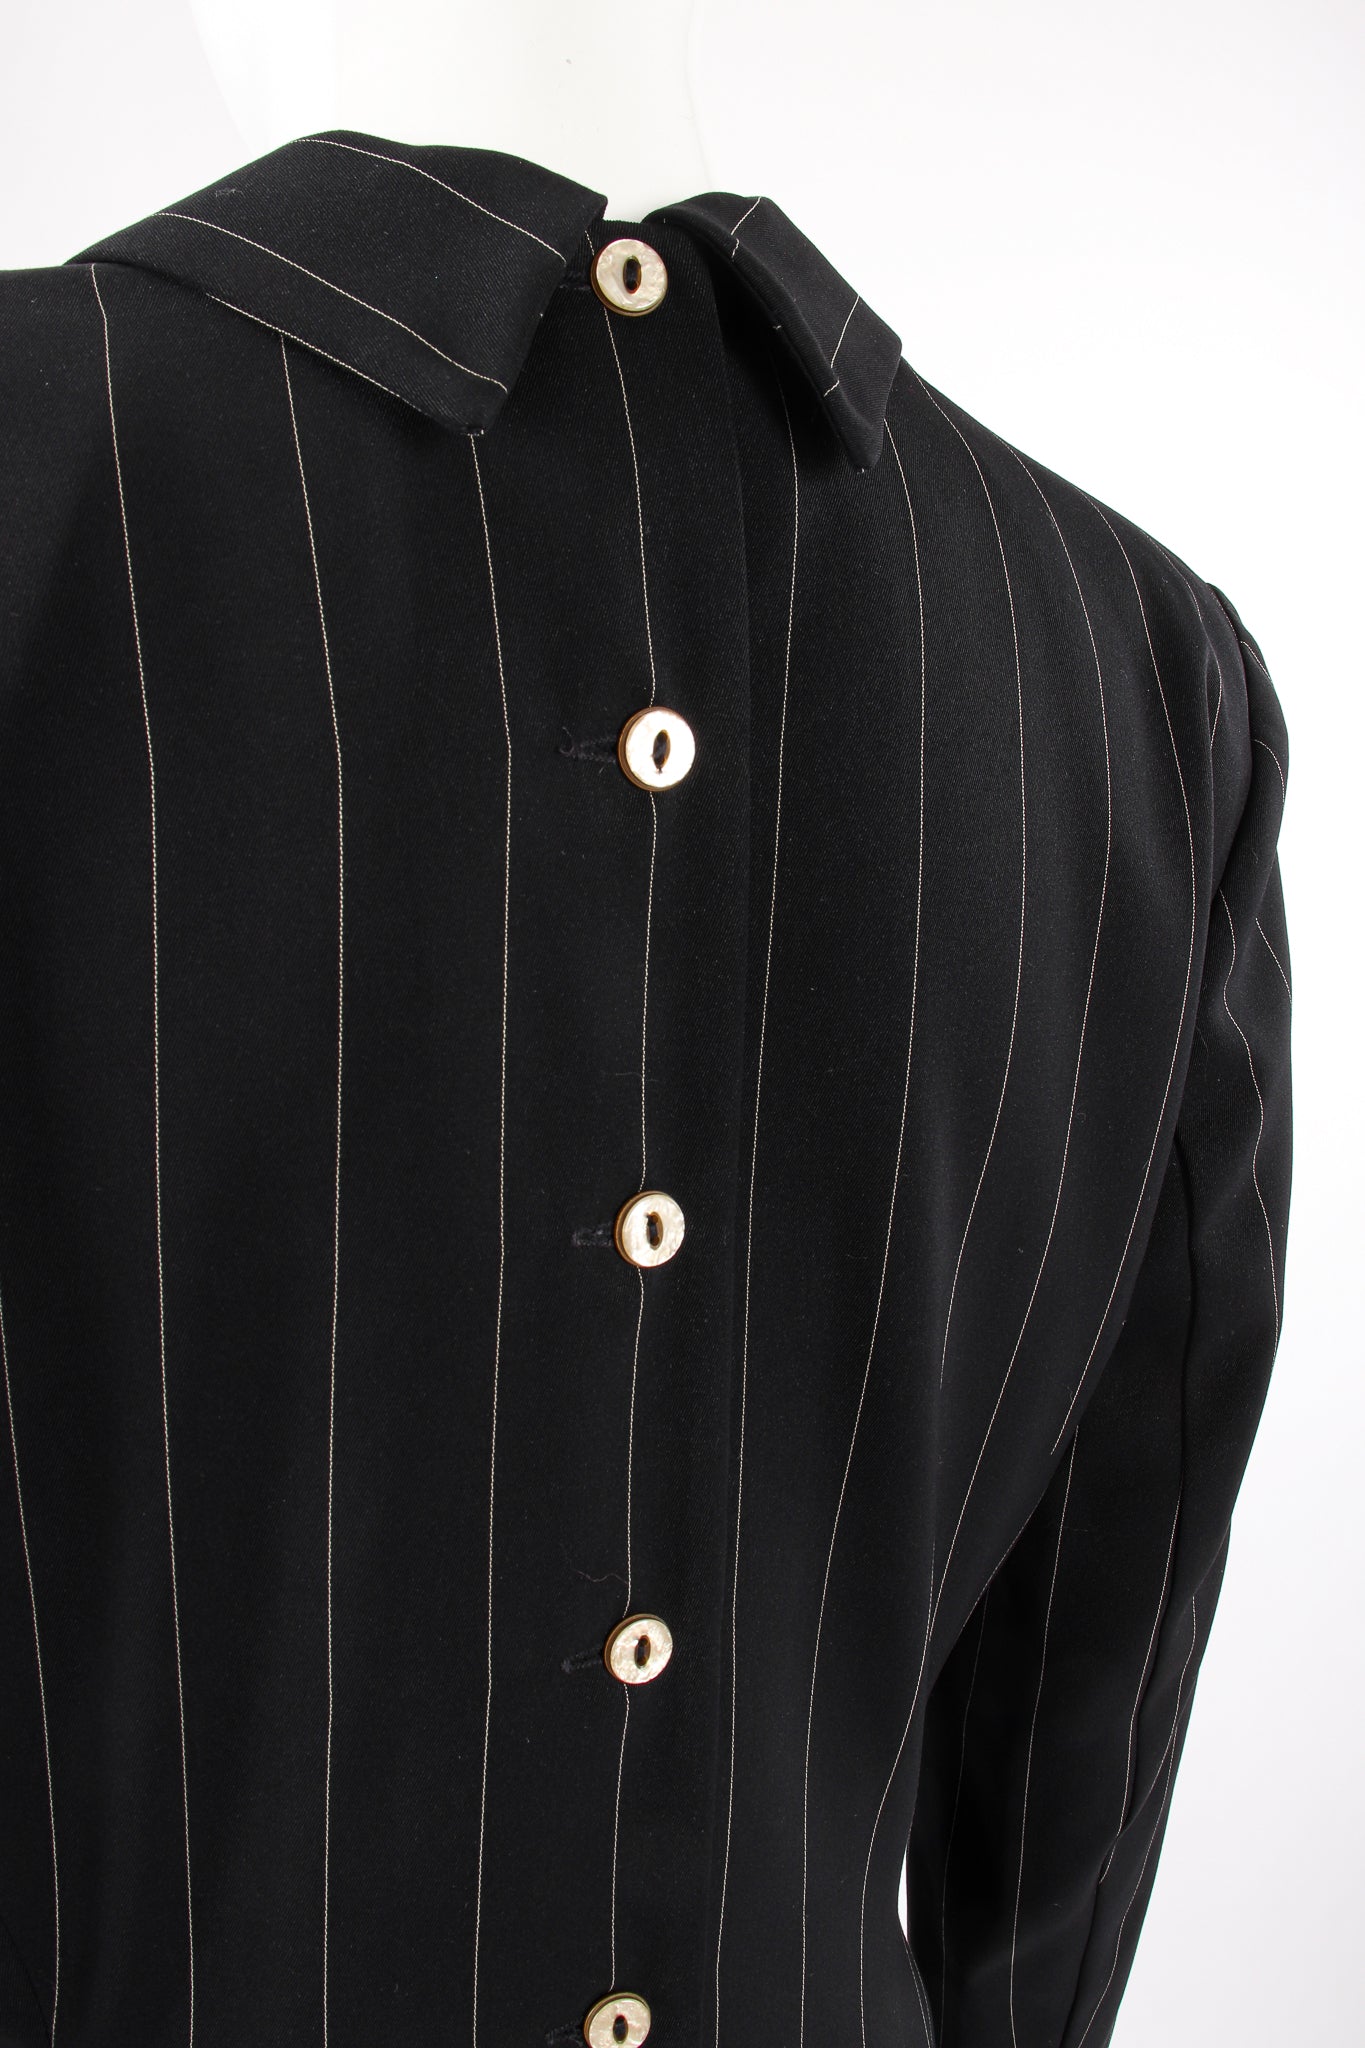 Vintage Antony Moorcroft Pinstripe Morning Coat on Mannequin back buttons at Recess Los Angeles